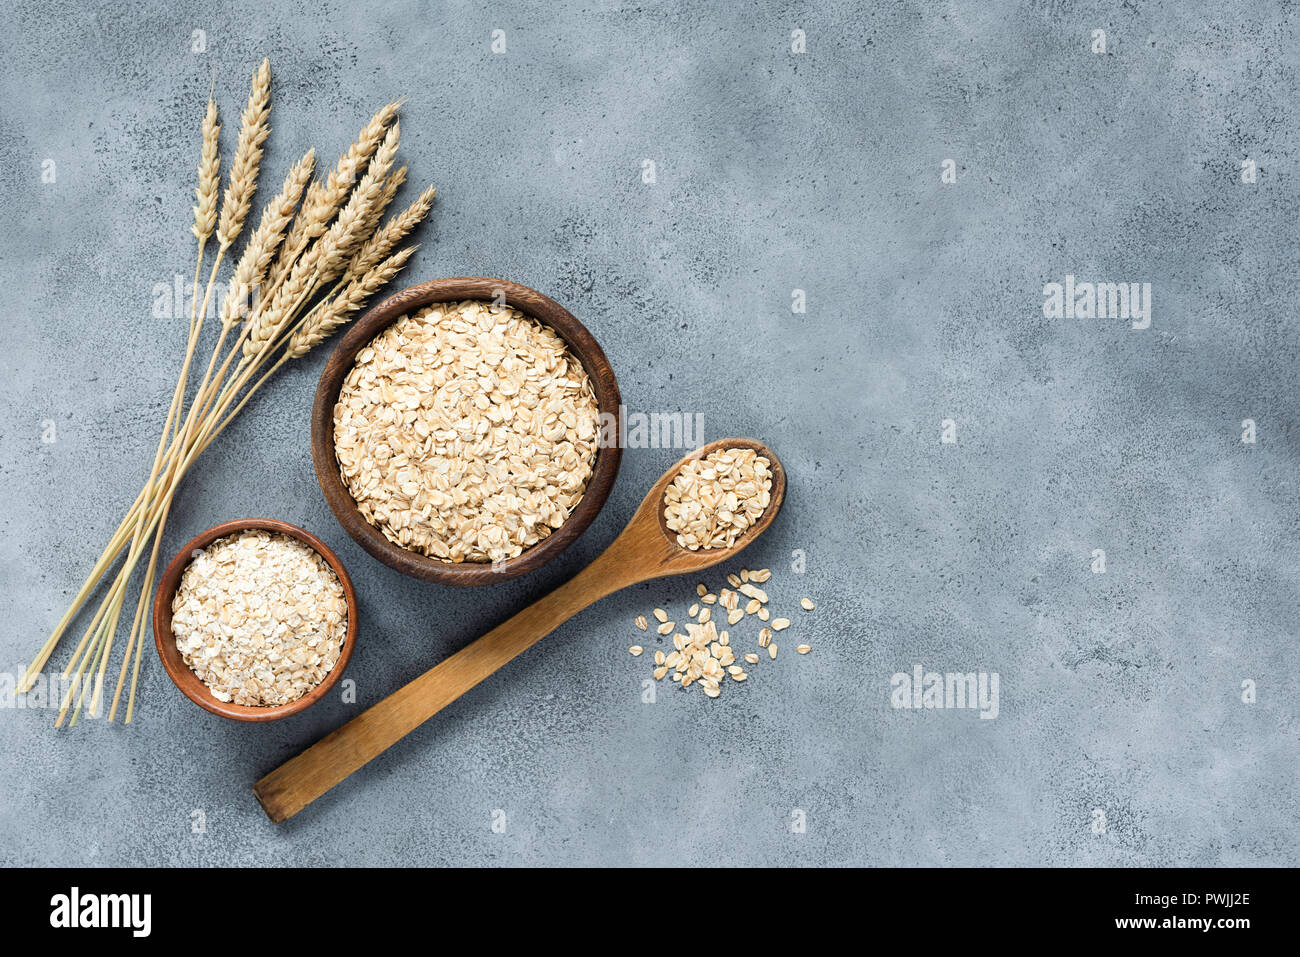 Oats, rolled oats and oat flakes in wooden bowl, top view. Concept of healthy eating, healthy lifestyle, dieting and vegetarian food Stock Photo